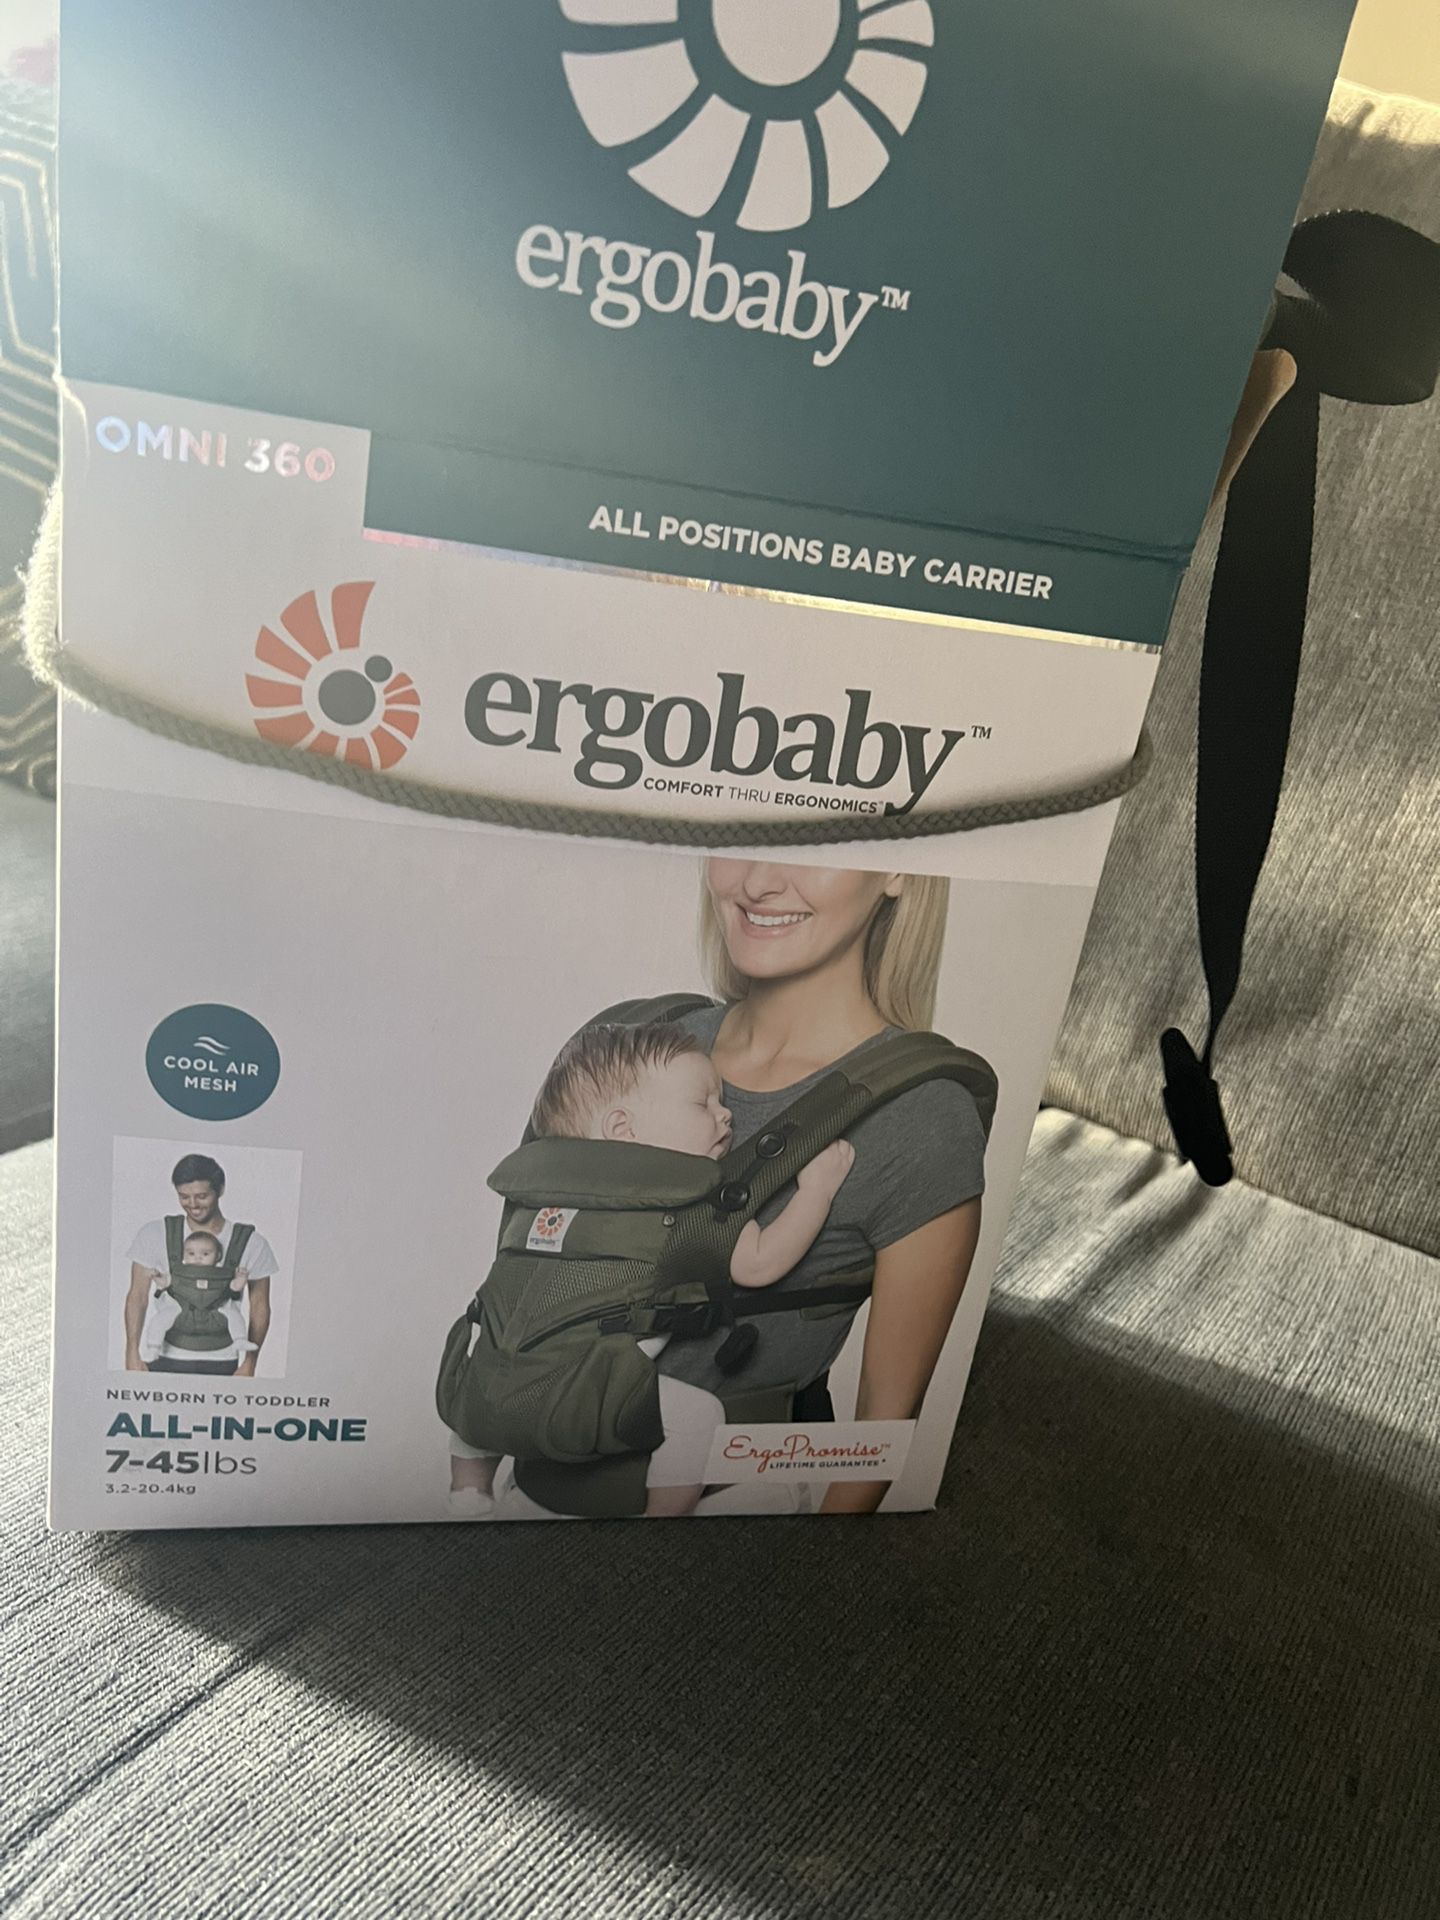 All Positions Baby Carrier